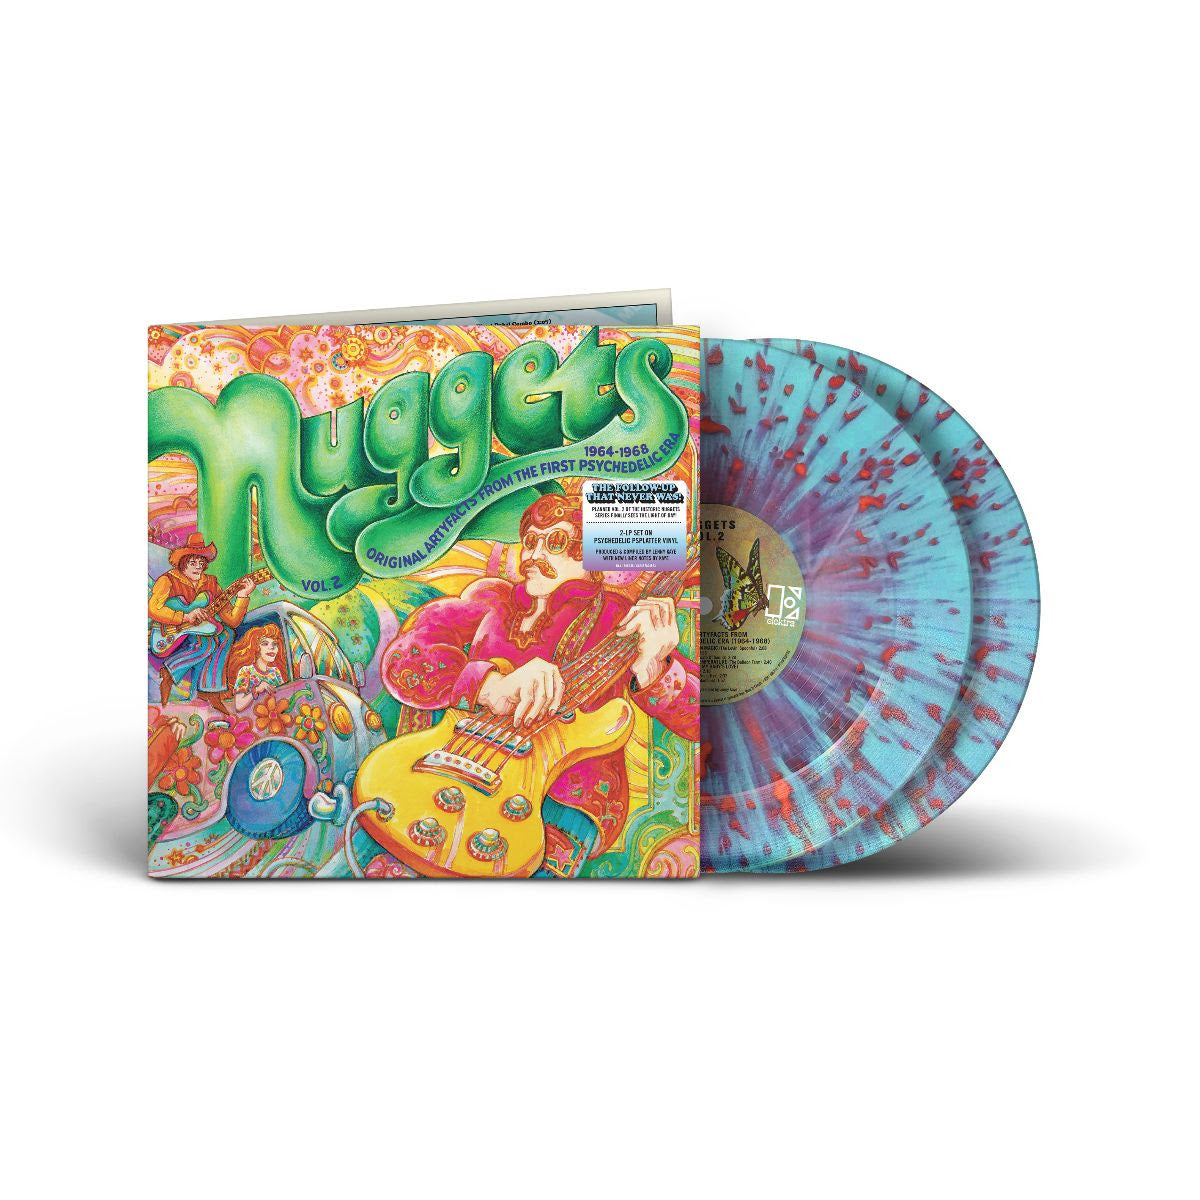 VA - Nuggets: Original Artyfacts From The First Psychedelic Era (1965-1968) Vol. 2 | Buy the Vinyl LP from Flying Nun Records 